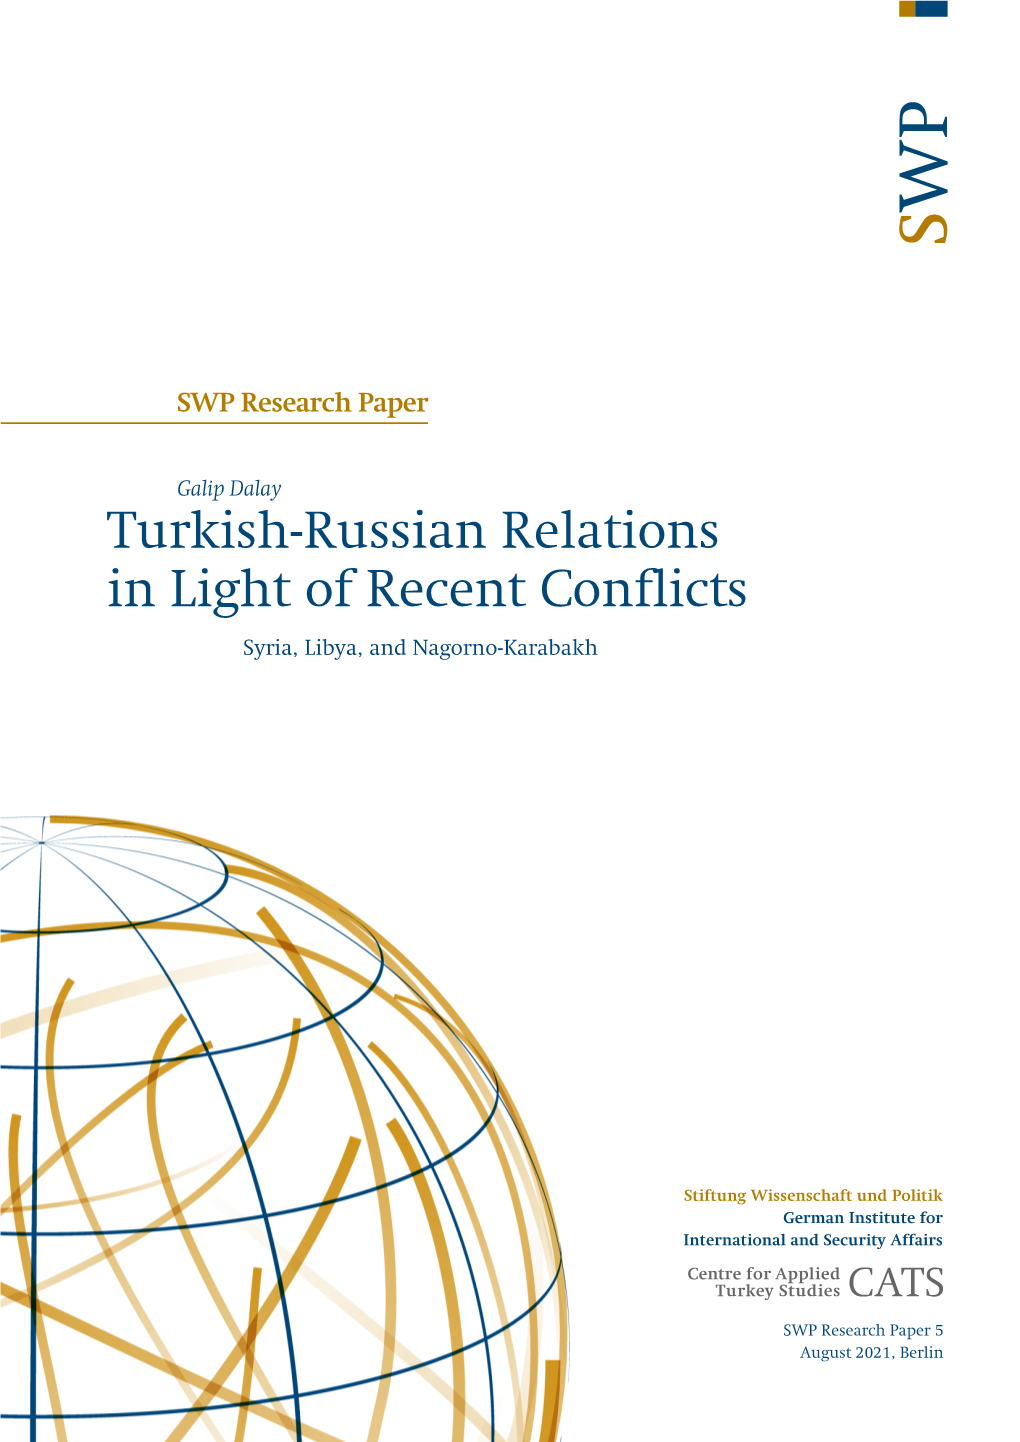 Turkish-Russian Relations in Light of Recent Conflicts. Syria, Libya, and Nagorno-Karabakh